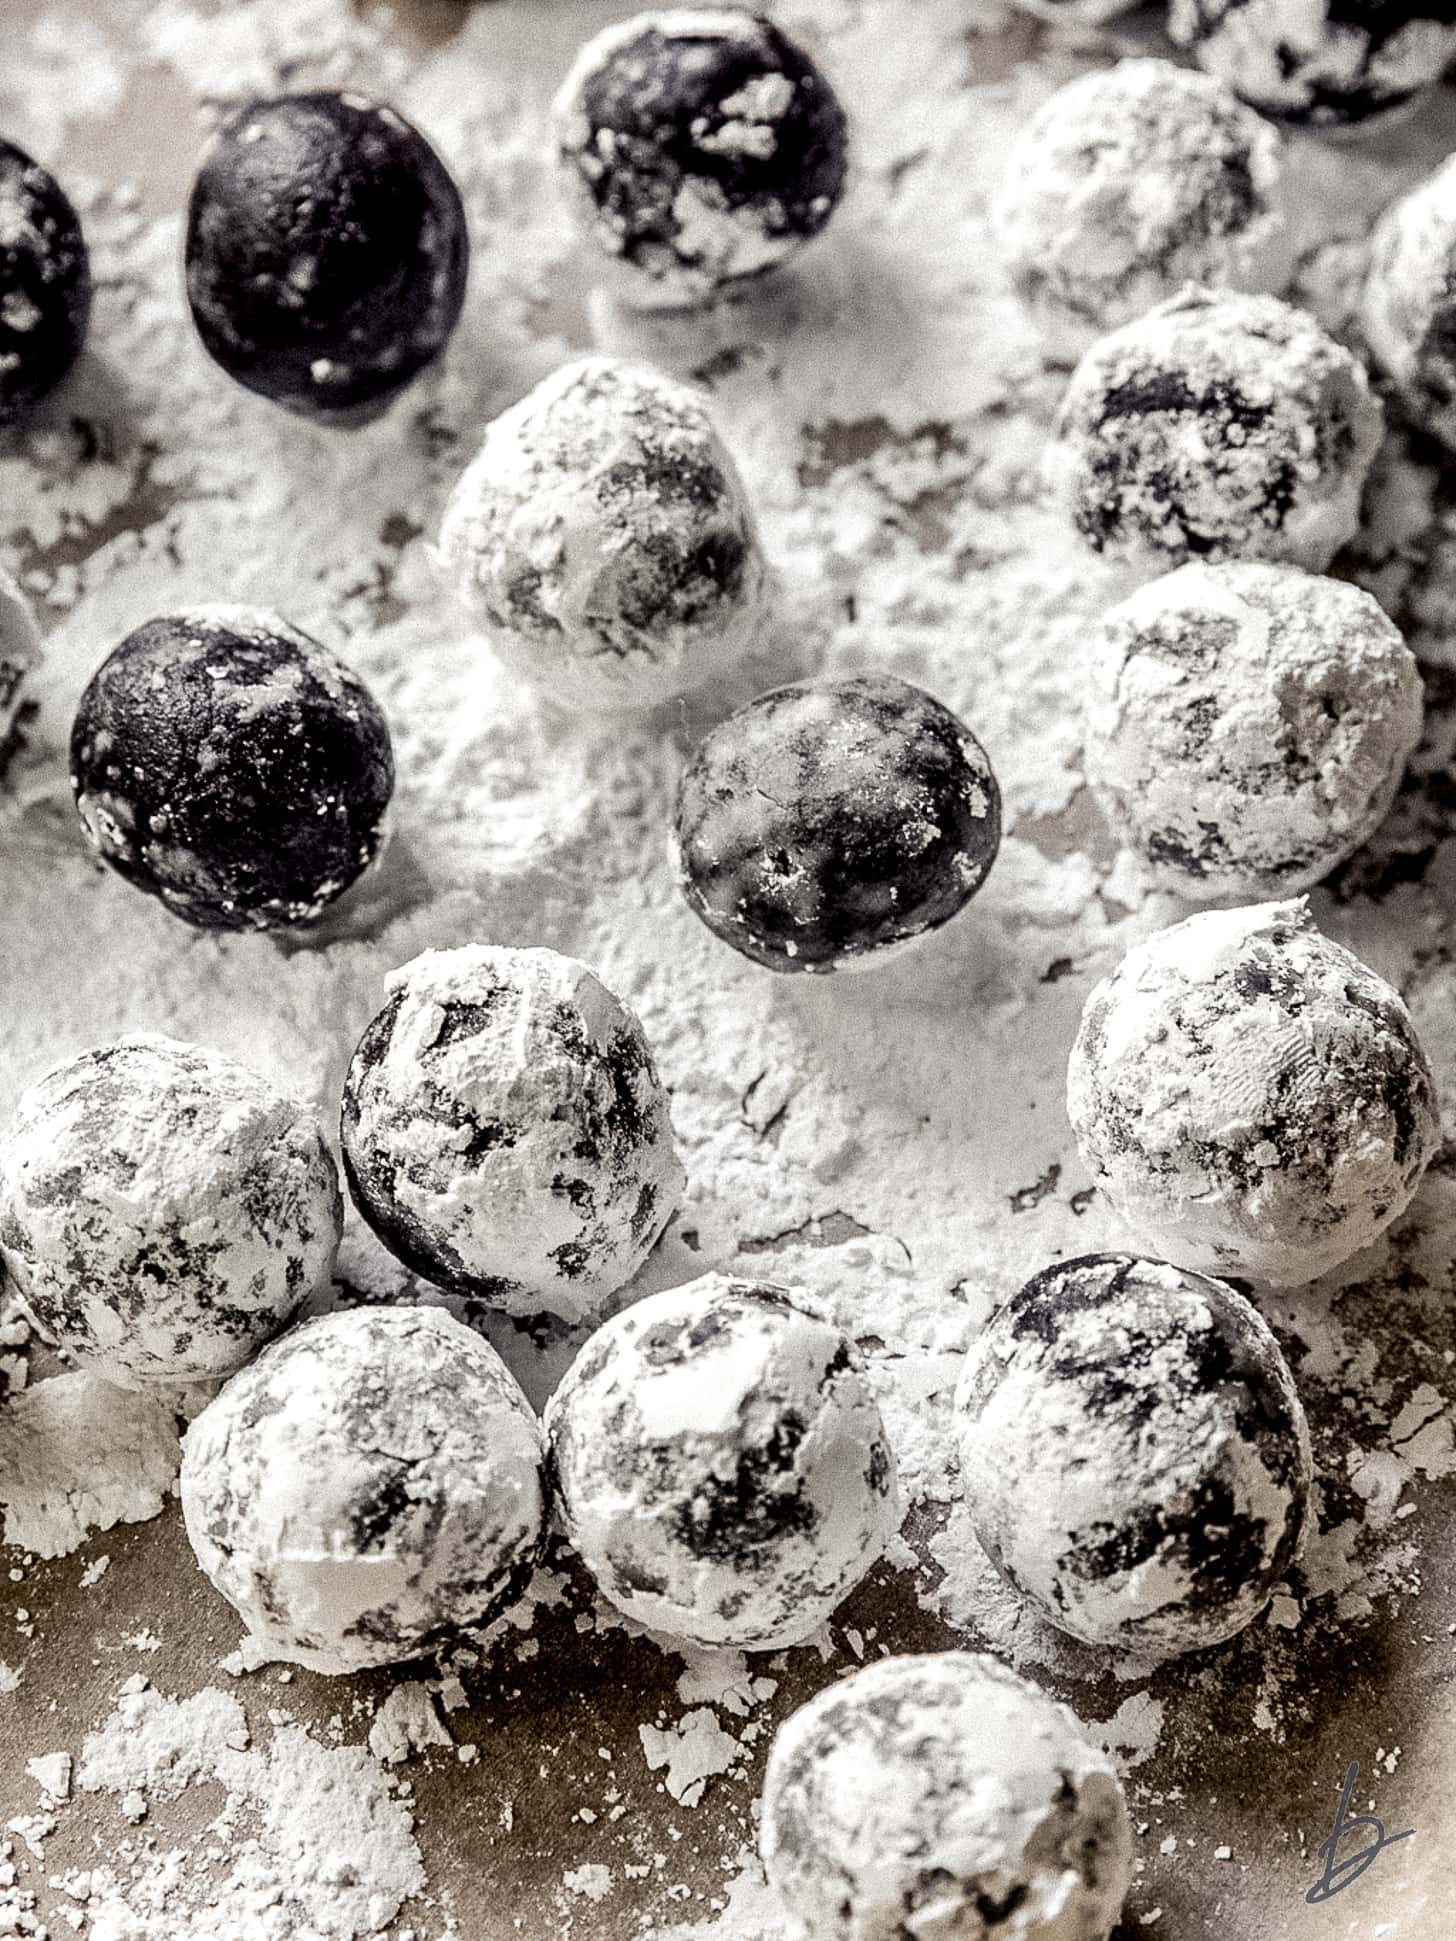 rum balls tossed in confectioners' sugar on a baking sheet.